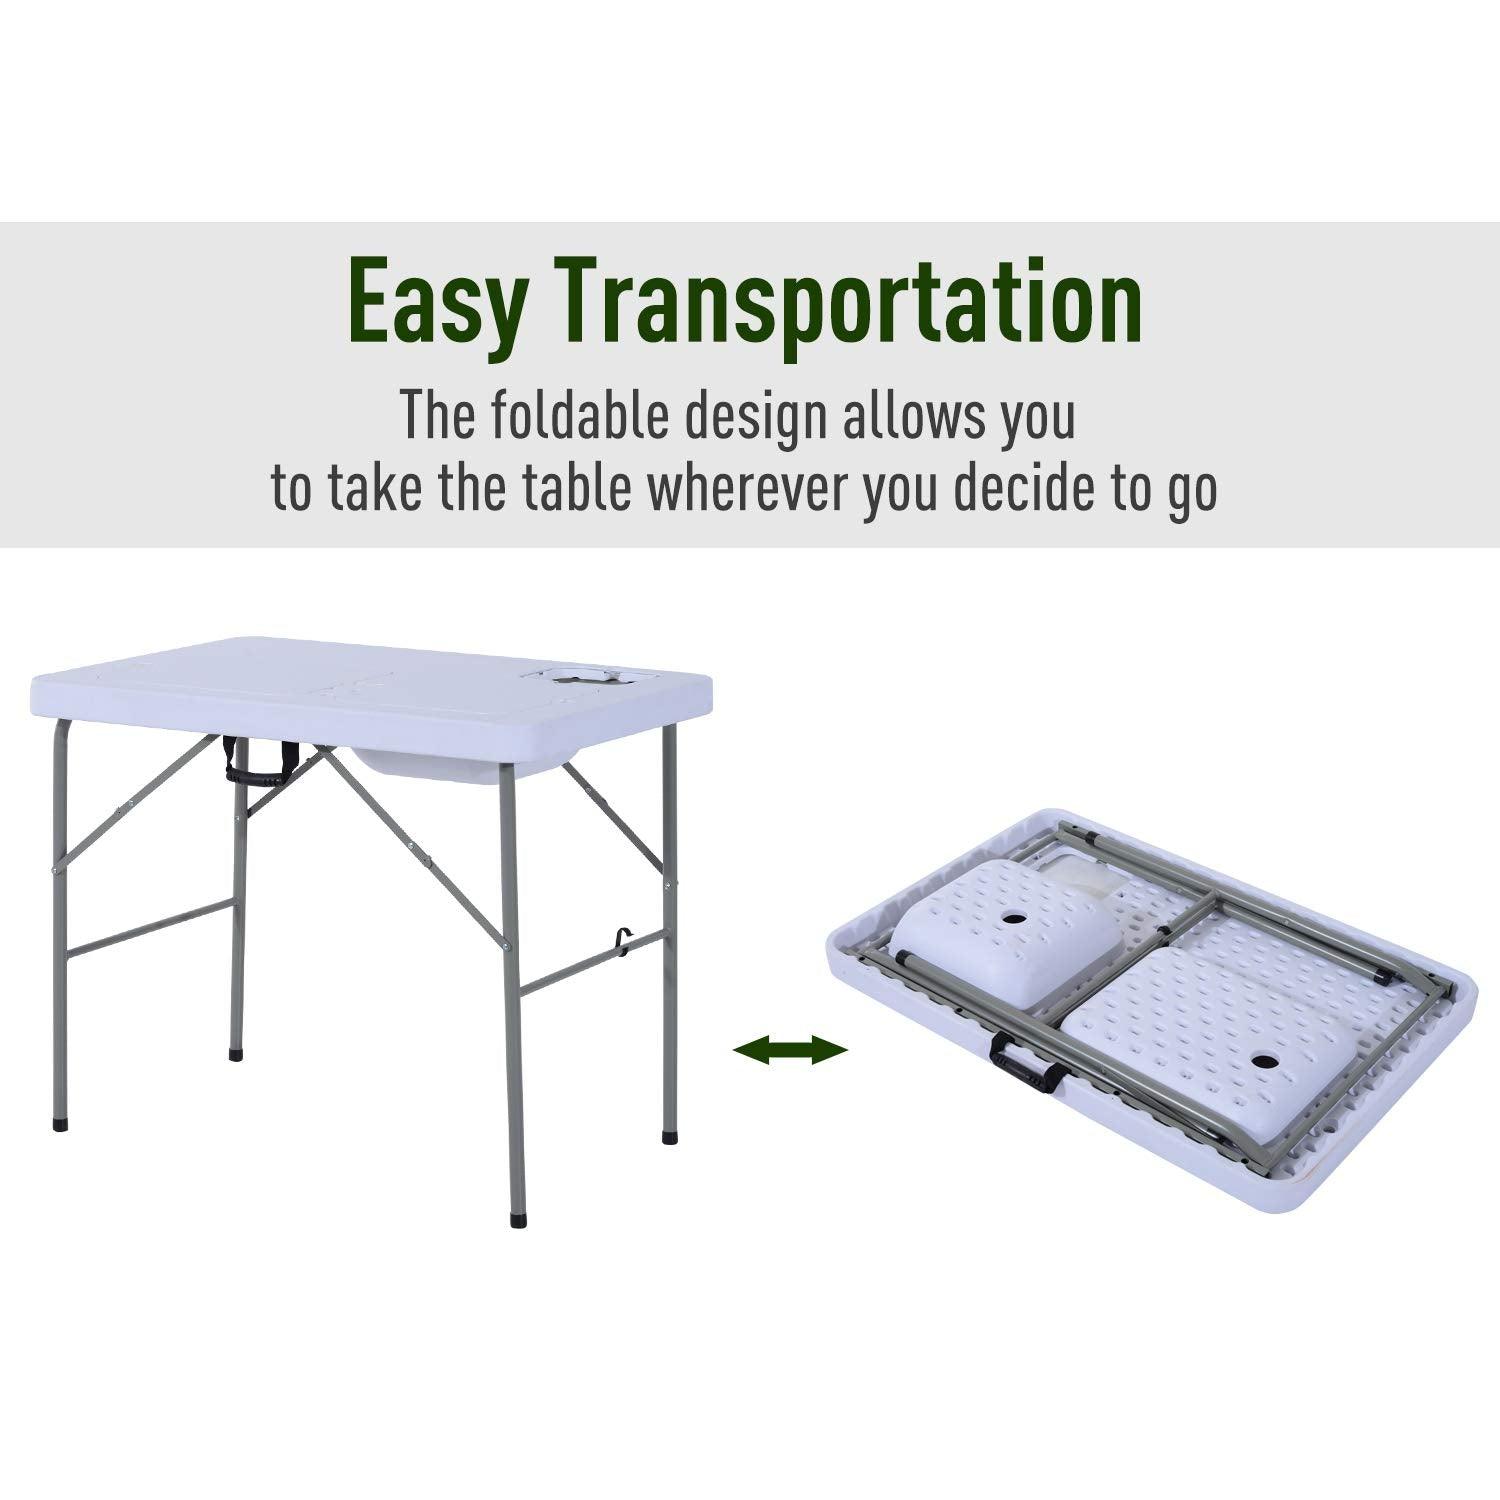 Outsunny Folding Camping Table with Faucet and Dual Water Basins, Outdoor Fish Table Sink Station, for Picnic, Fishing, 40'' - CookCave